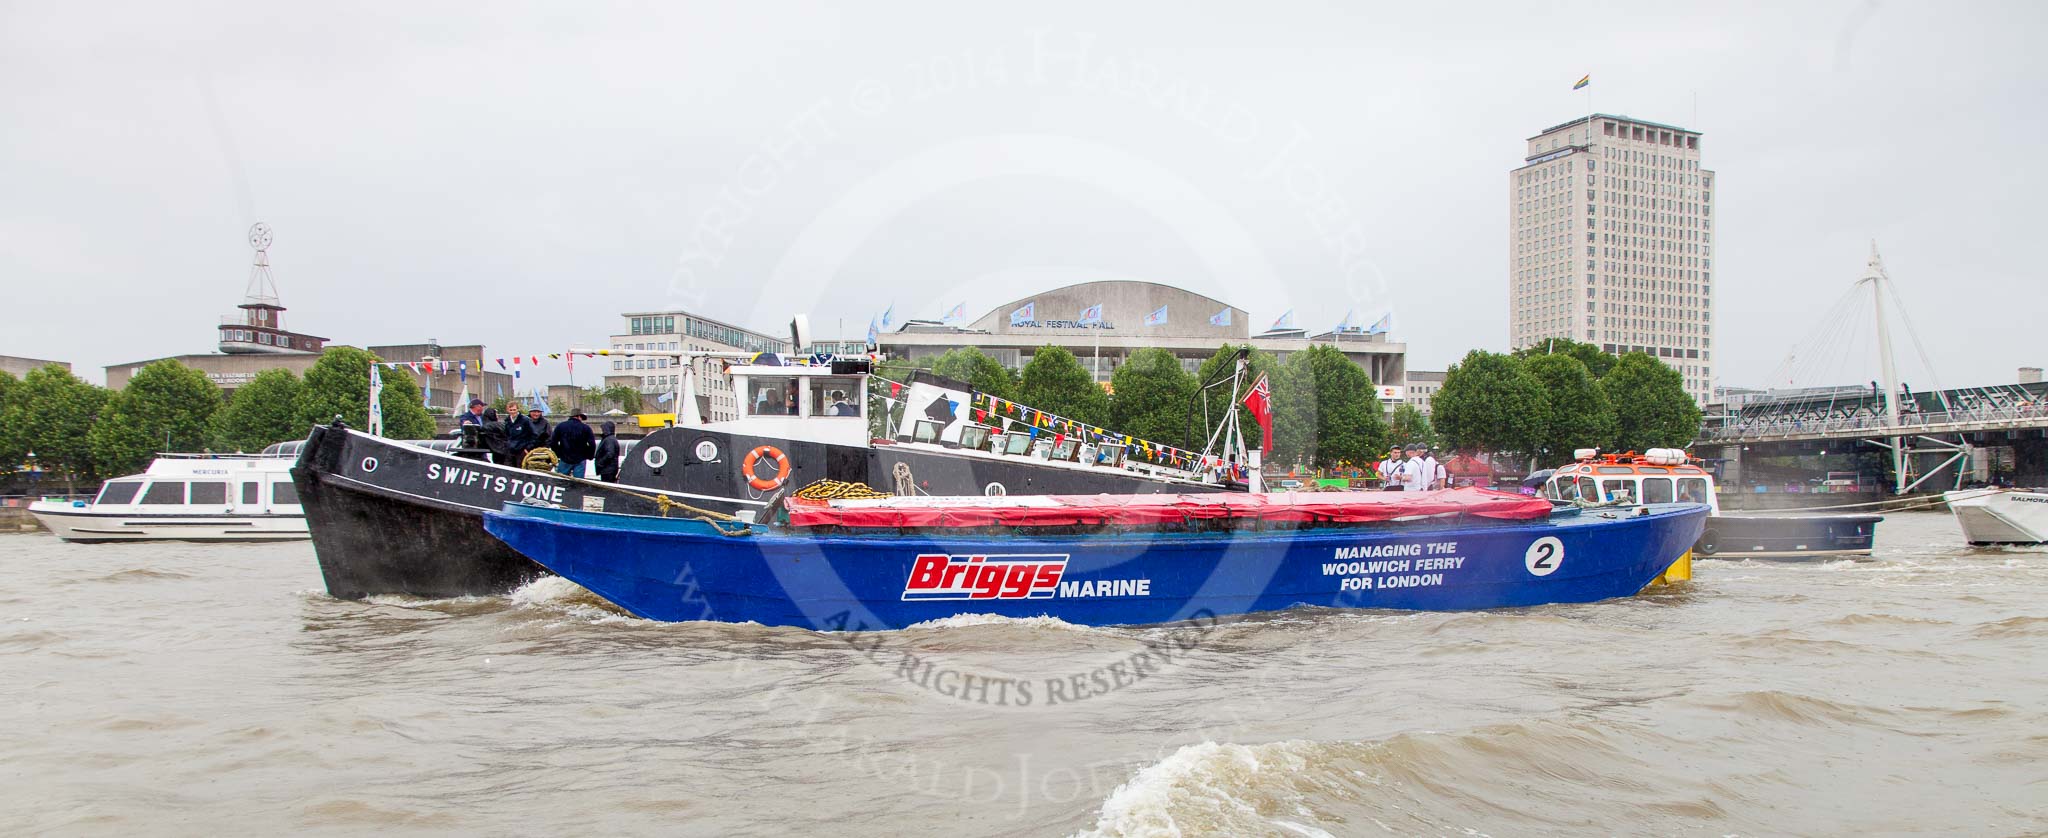 TOW River Thames Barge Driving Race 2014.
River Thames between Greenwich and Westminster,
London,

United Kingdom,
on 28 June 2014 at 14:50, image #452